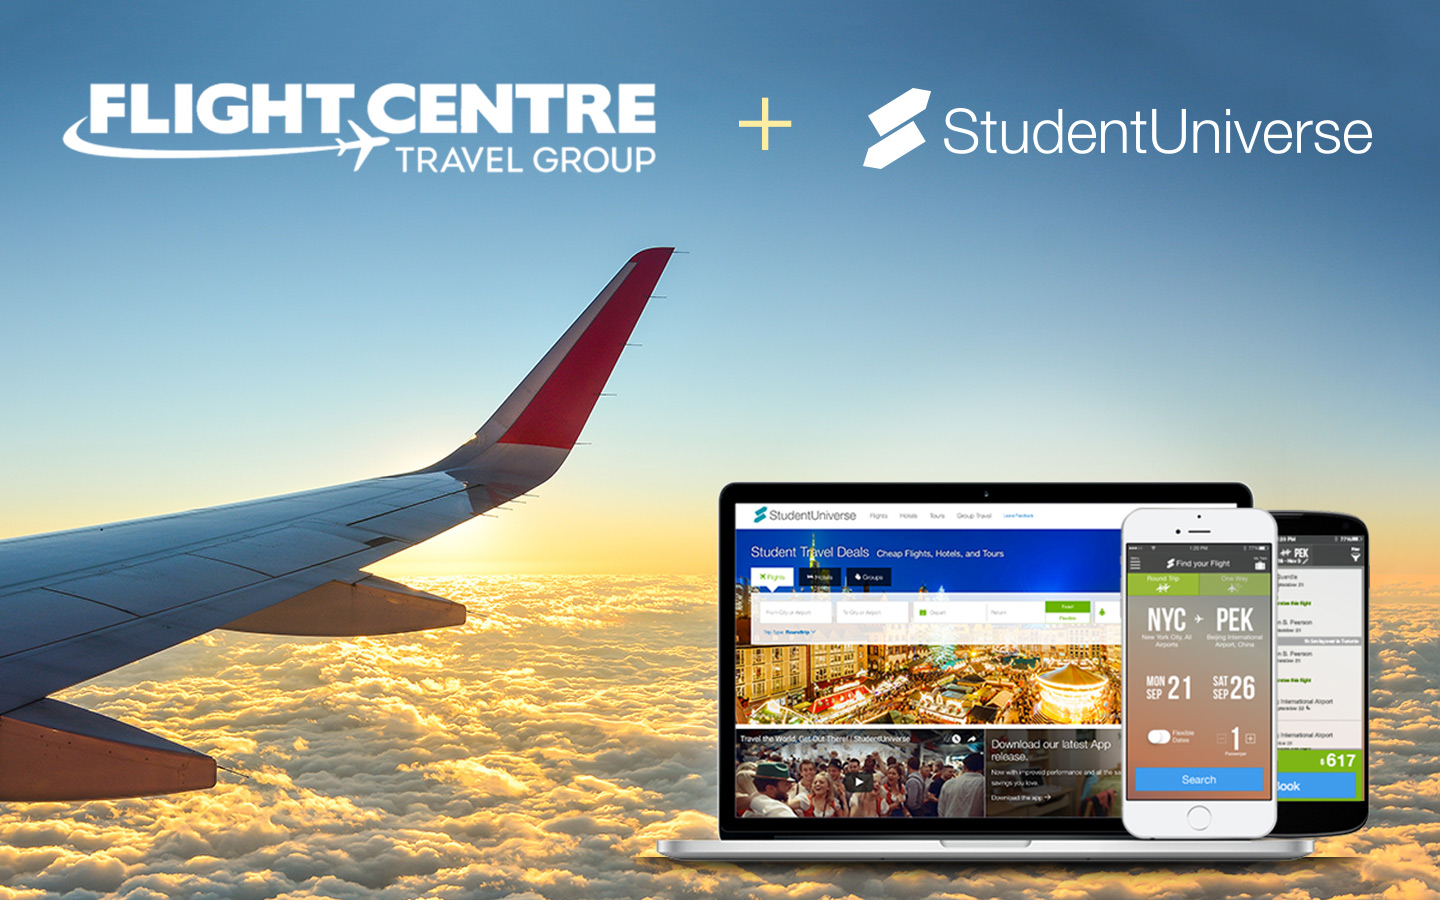 Flight Centre and StudentUniverse